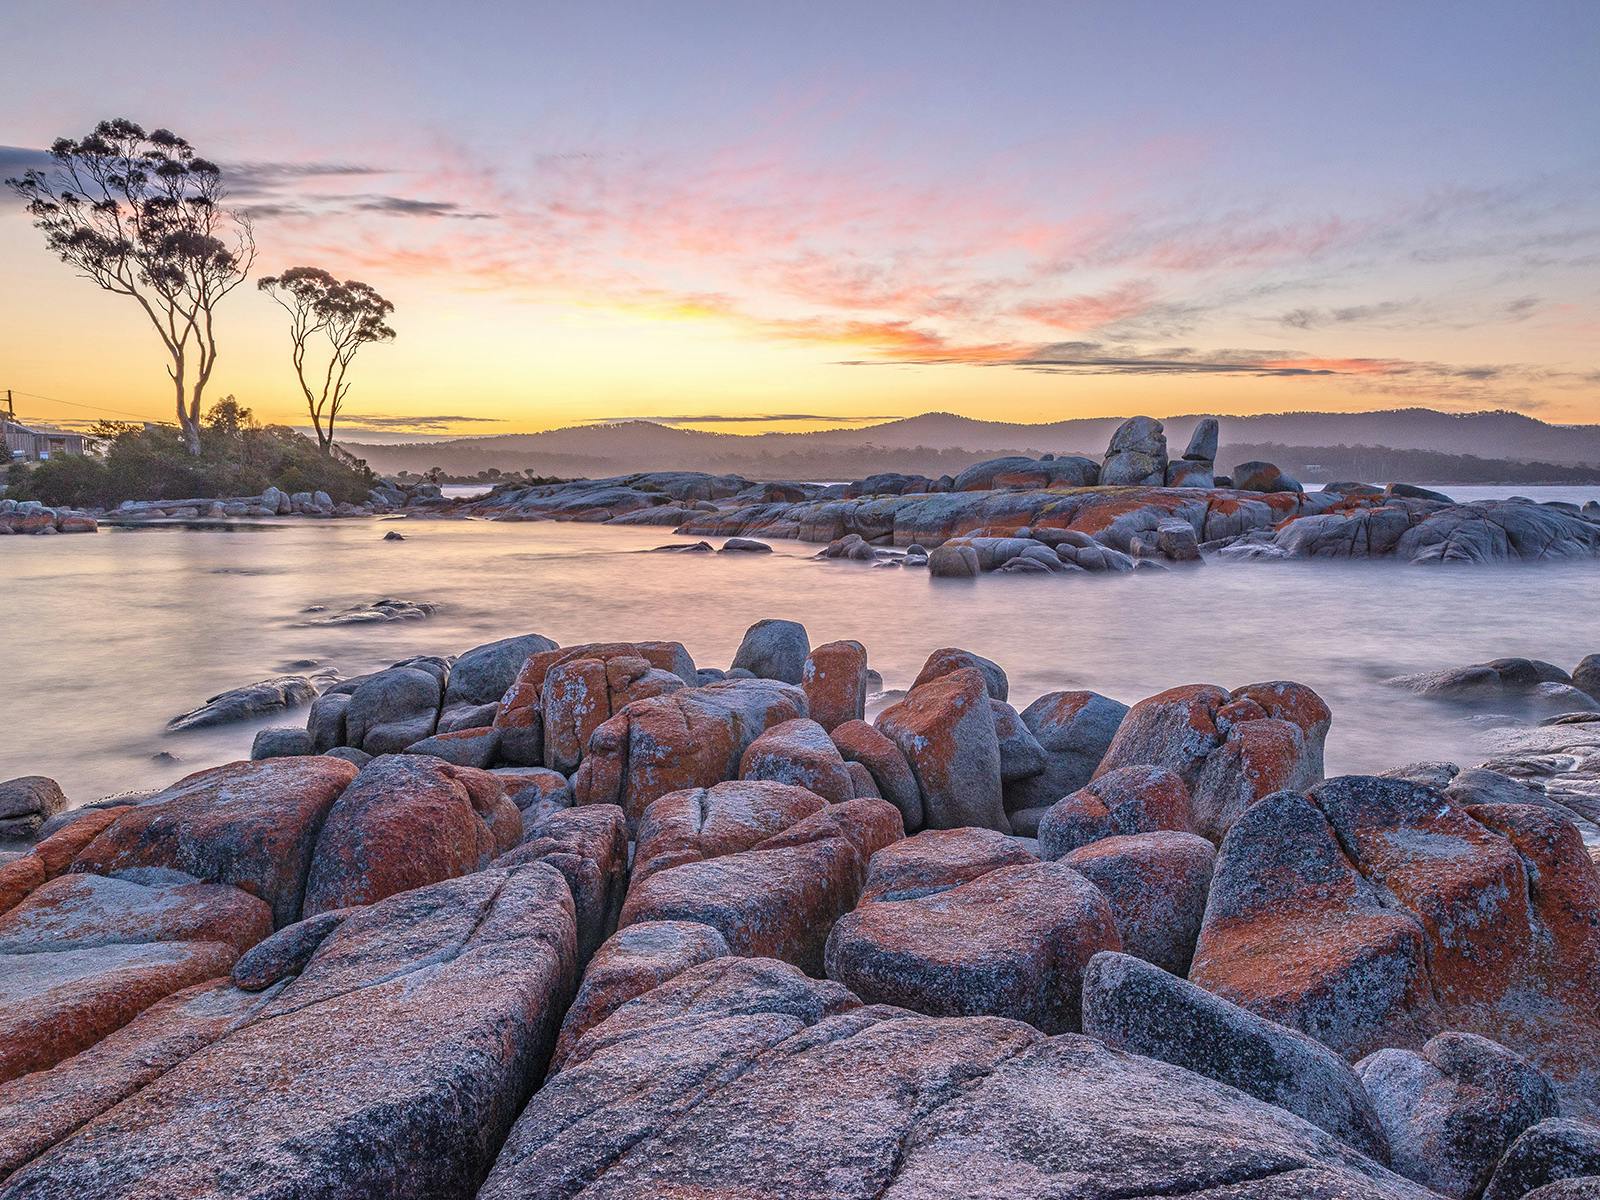 Sunset in the Bay of Fires